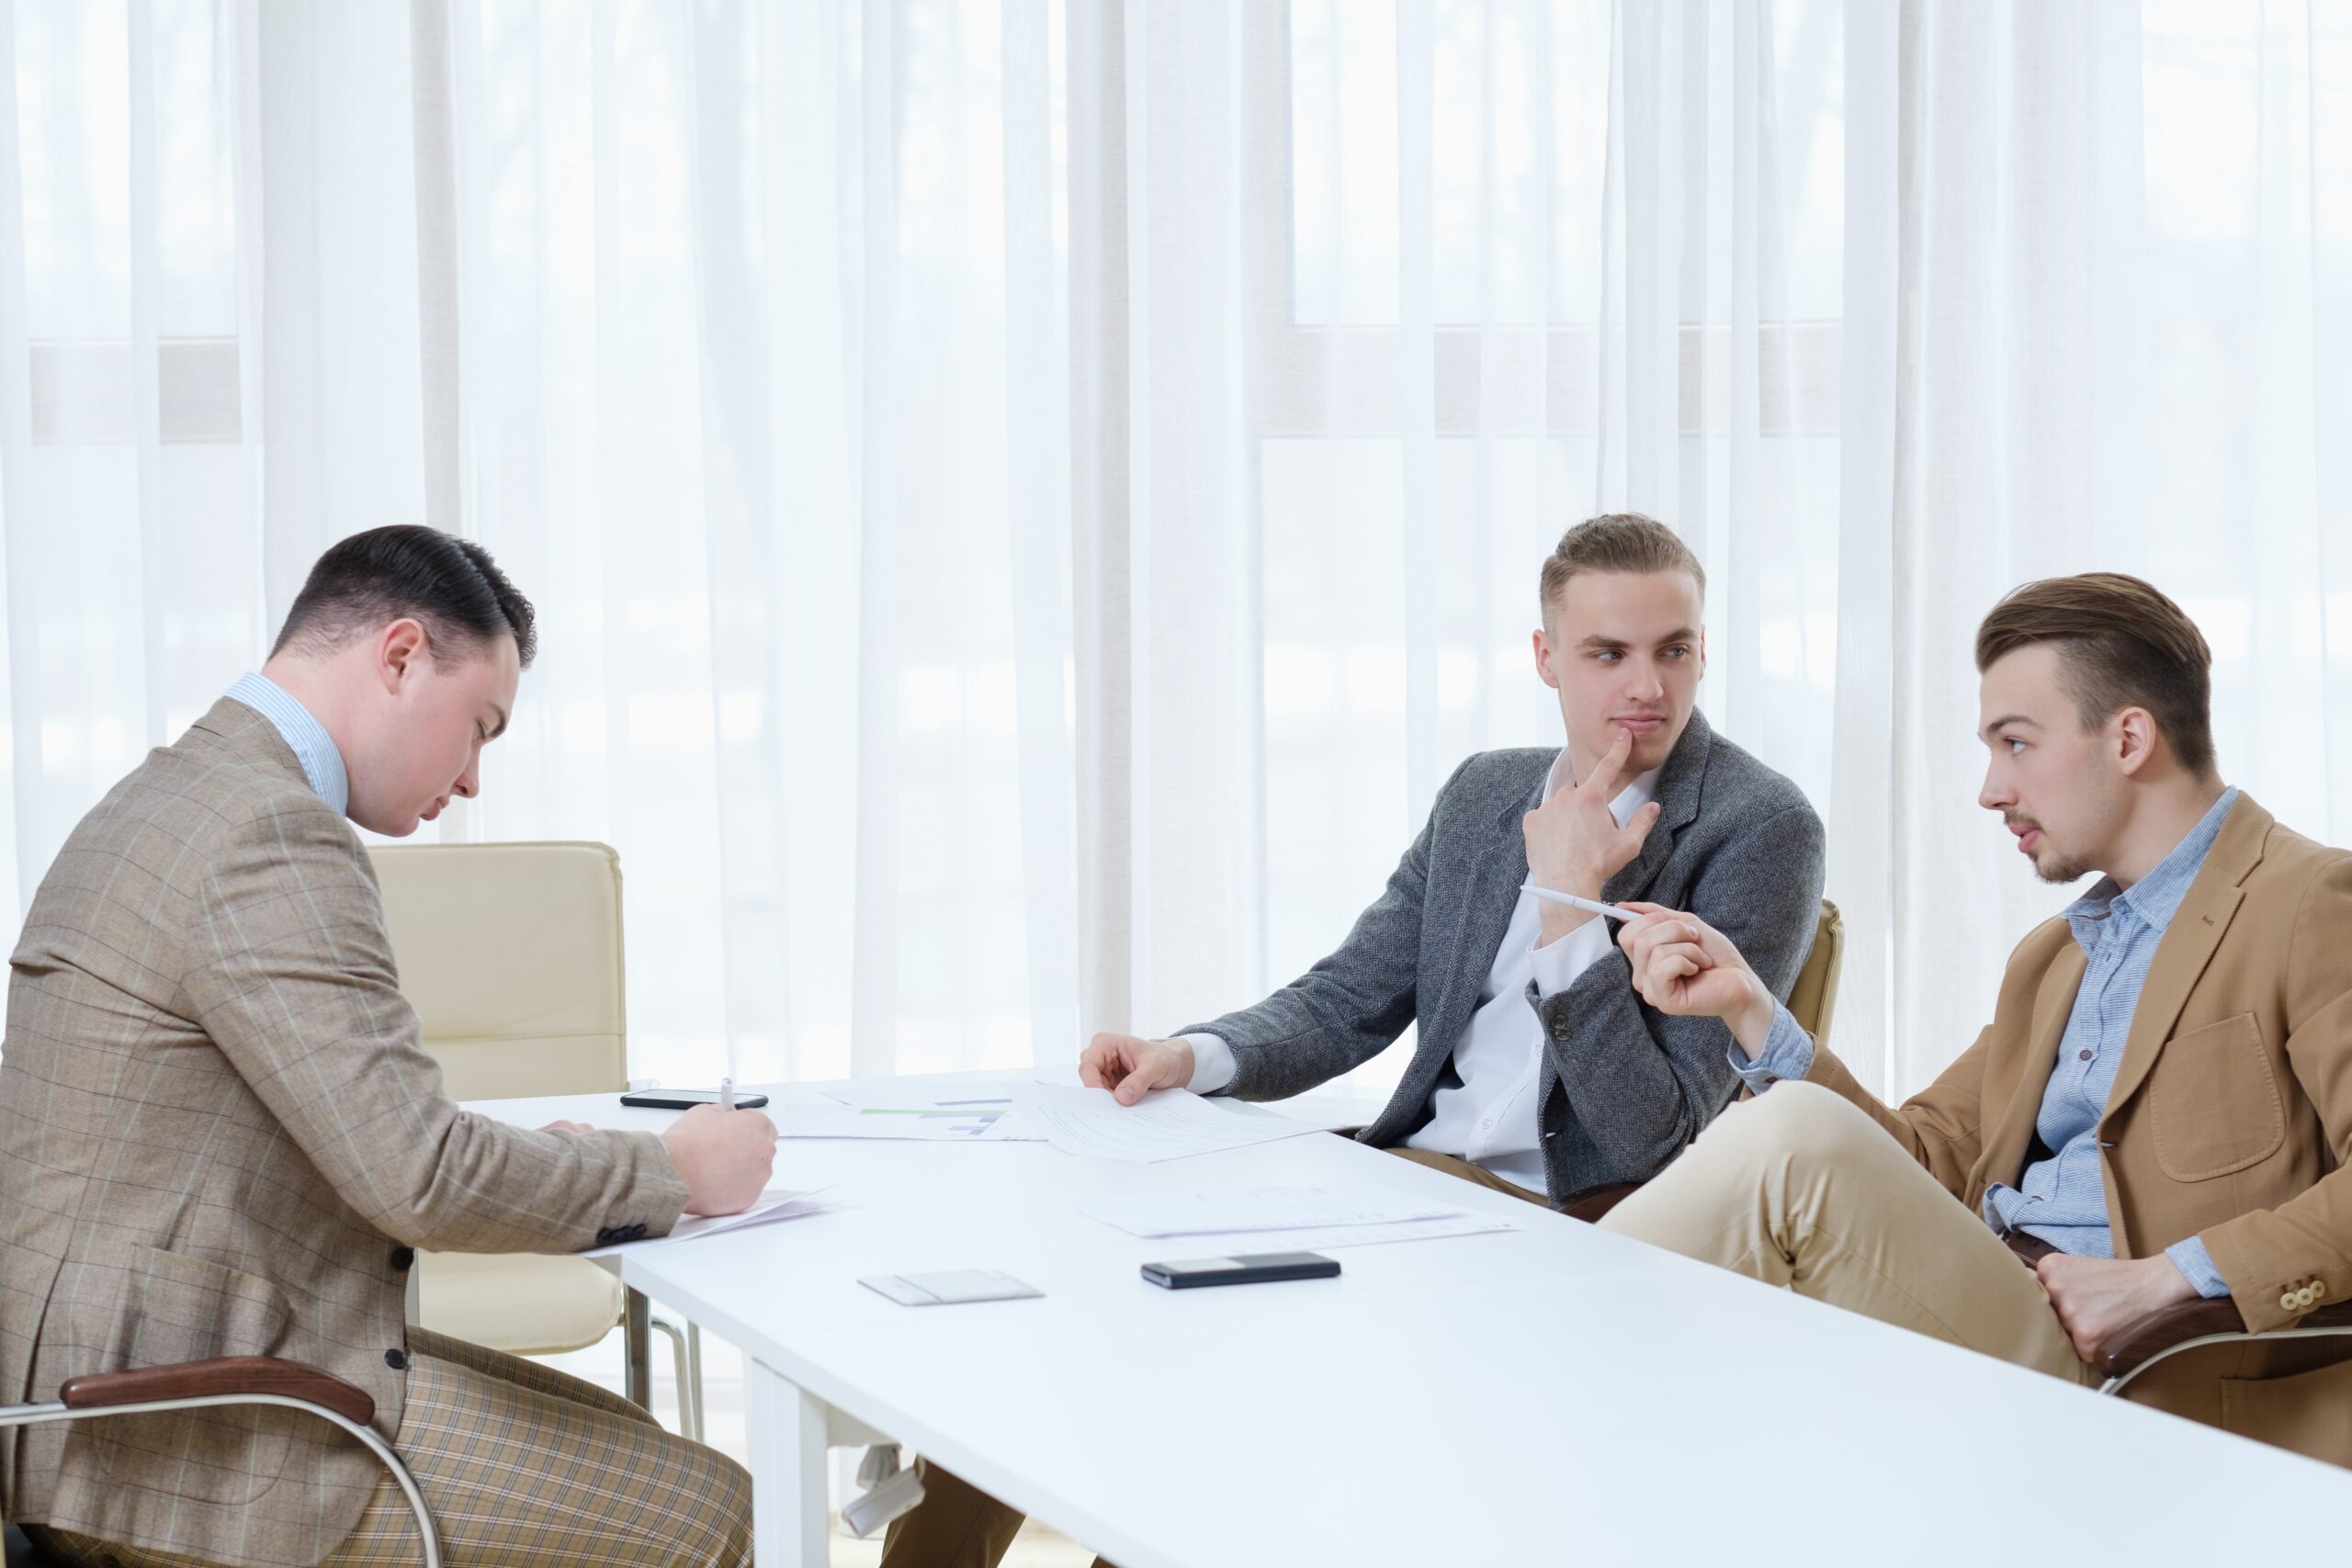 group interview is when interview consists of one interviewing multiple candidates